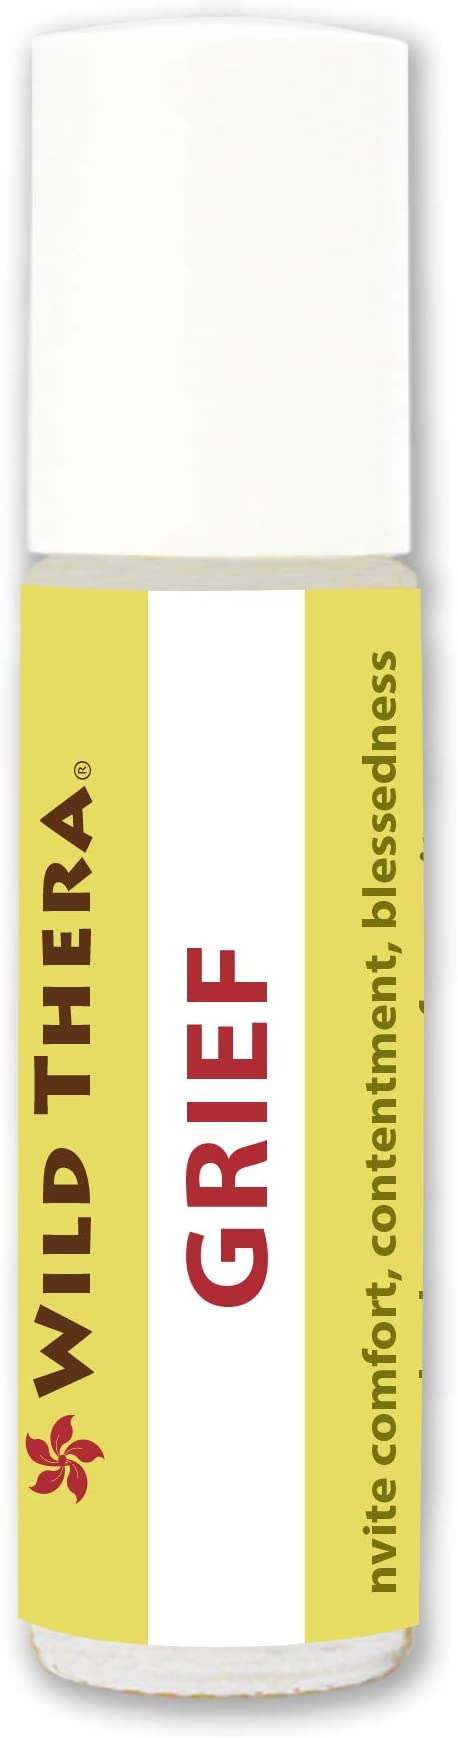 Wild Thera Grief EO Blend 10 ml. Therapeutic Grade Certified Essential Oil. Release Feelings of Sadness, Burden and Loss. Replace with Hope, grounding and Comfort.